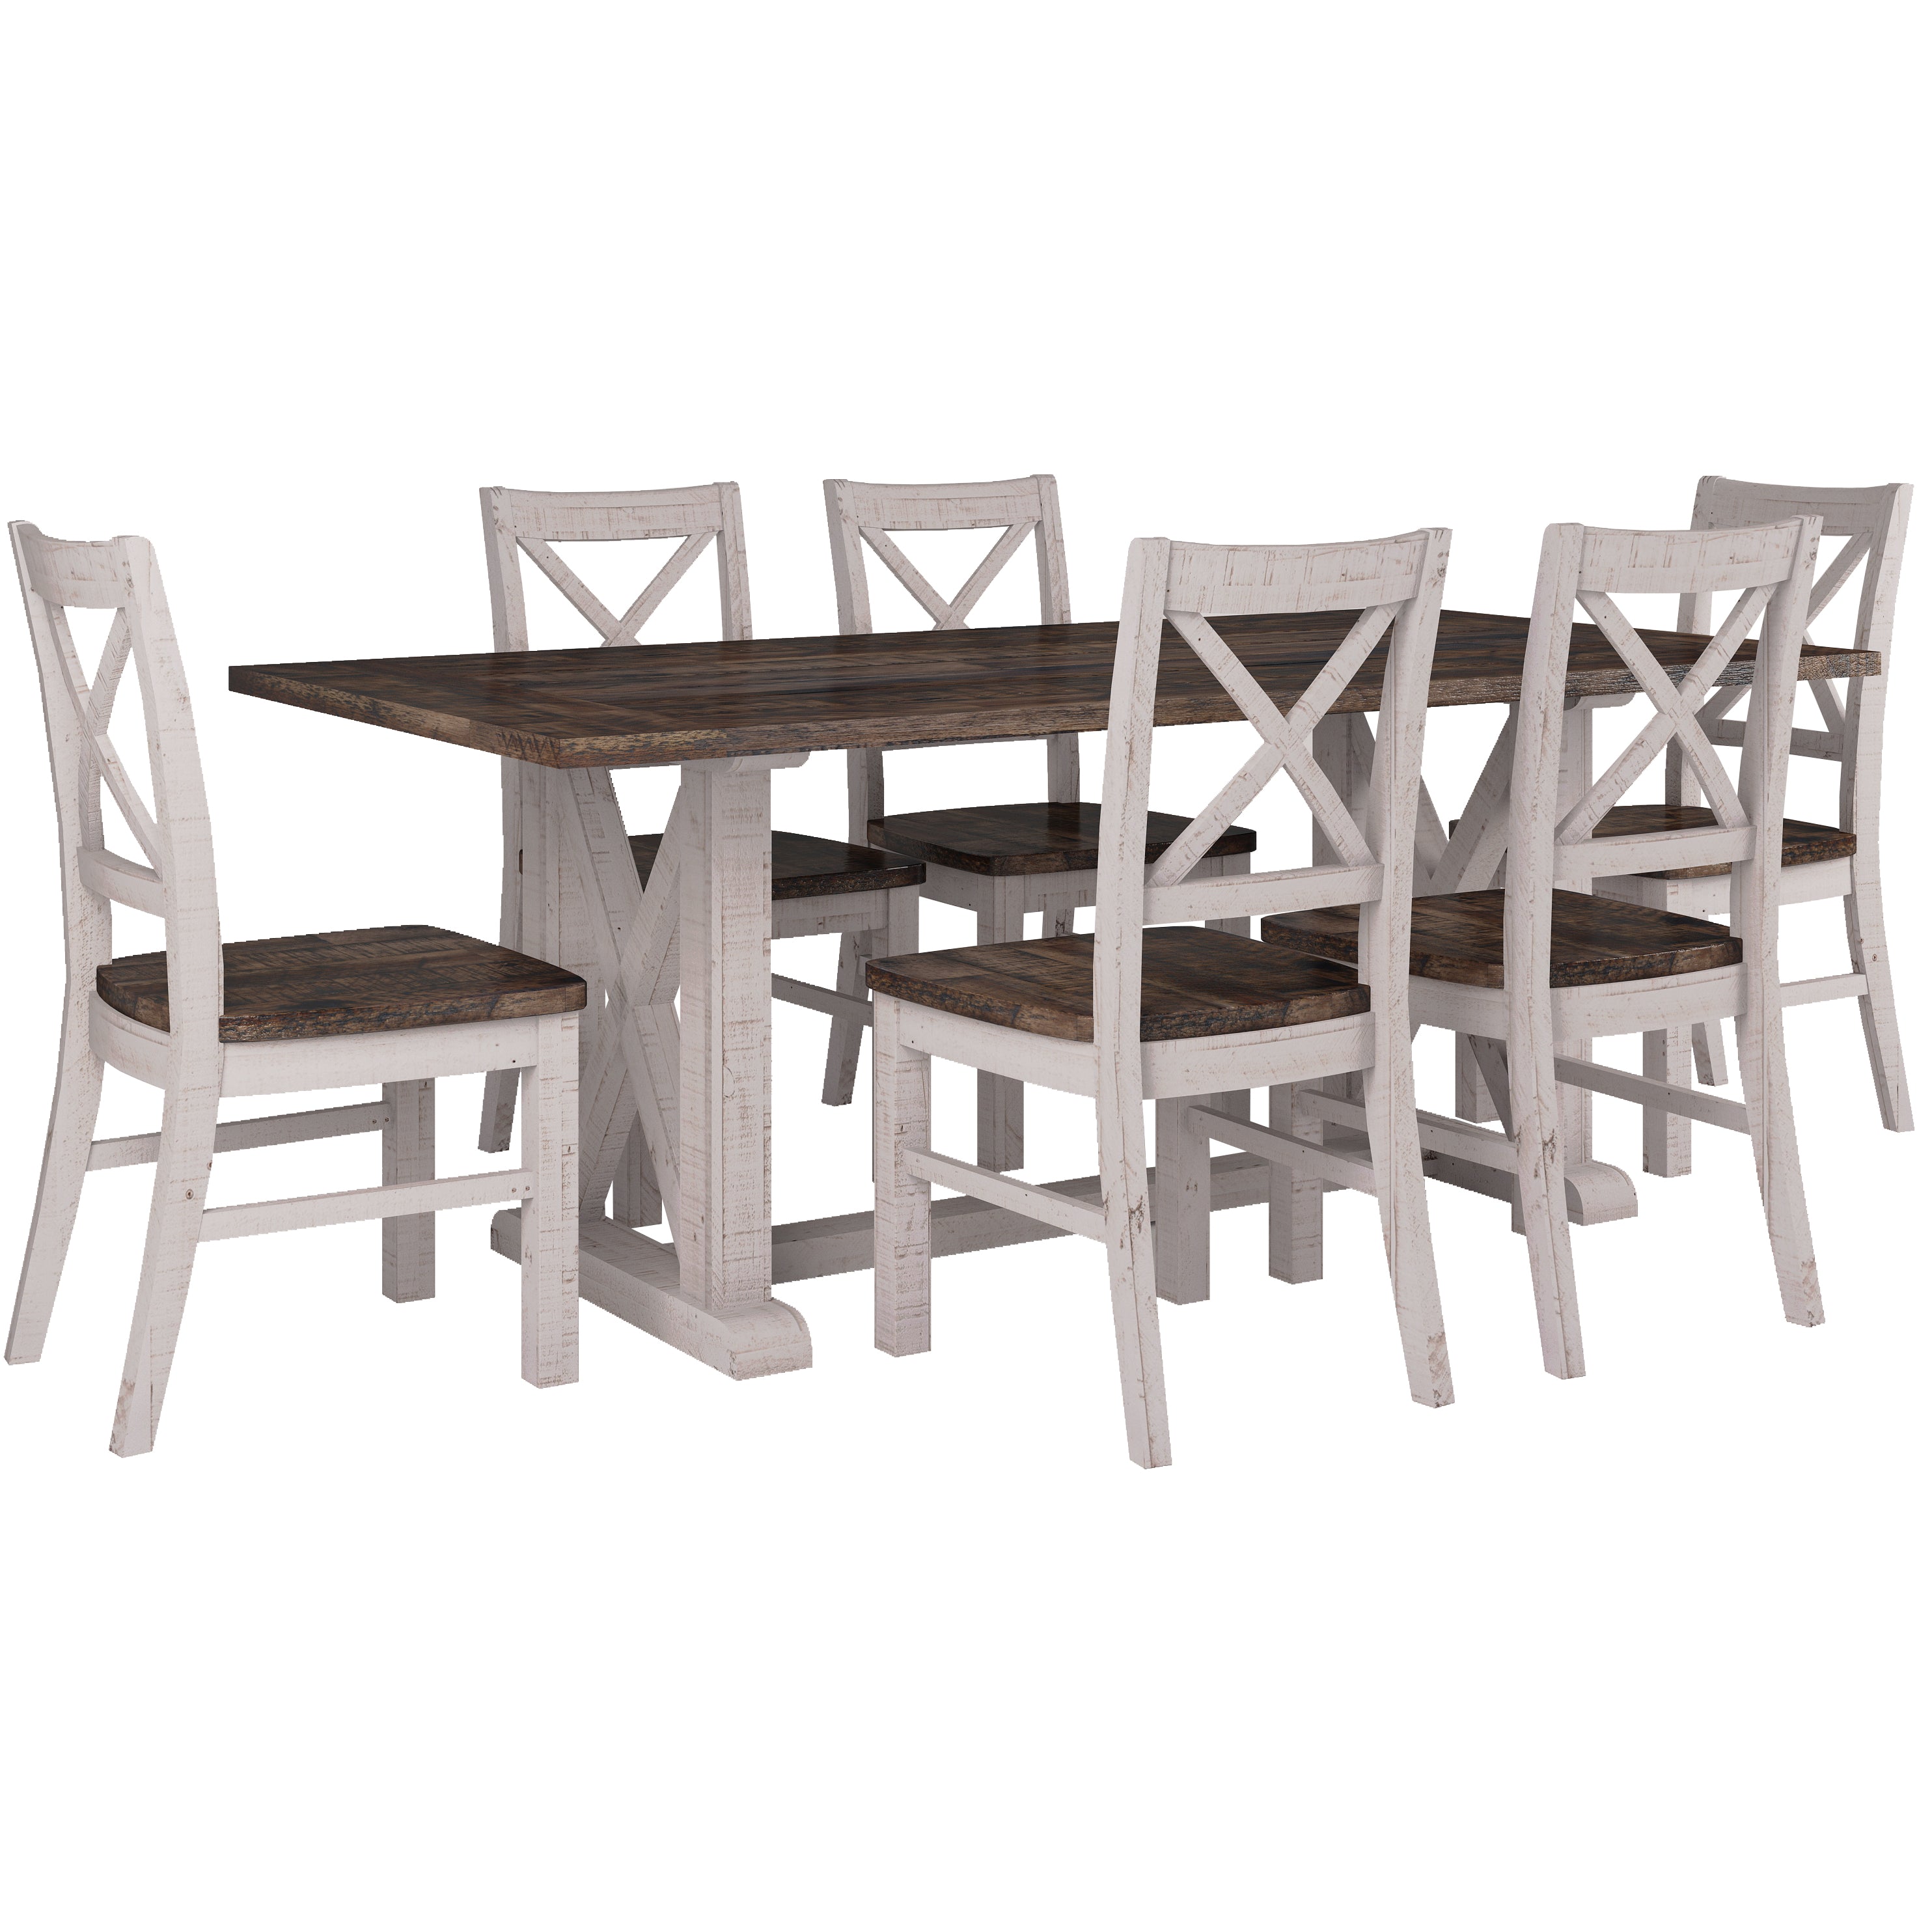 Erica 7pc Dining Set 200cm Table 6 Chair Solid Acacia Wood Timber Brown White - SILBERSHELL